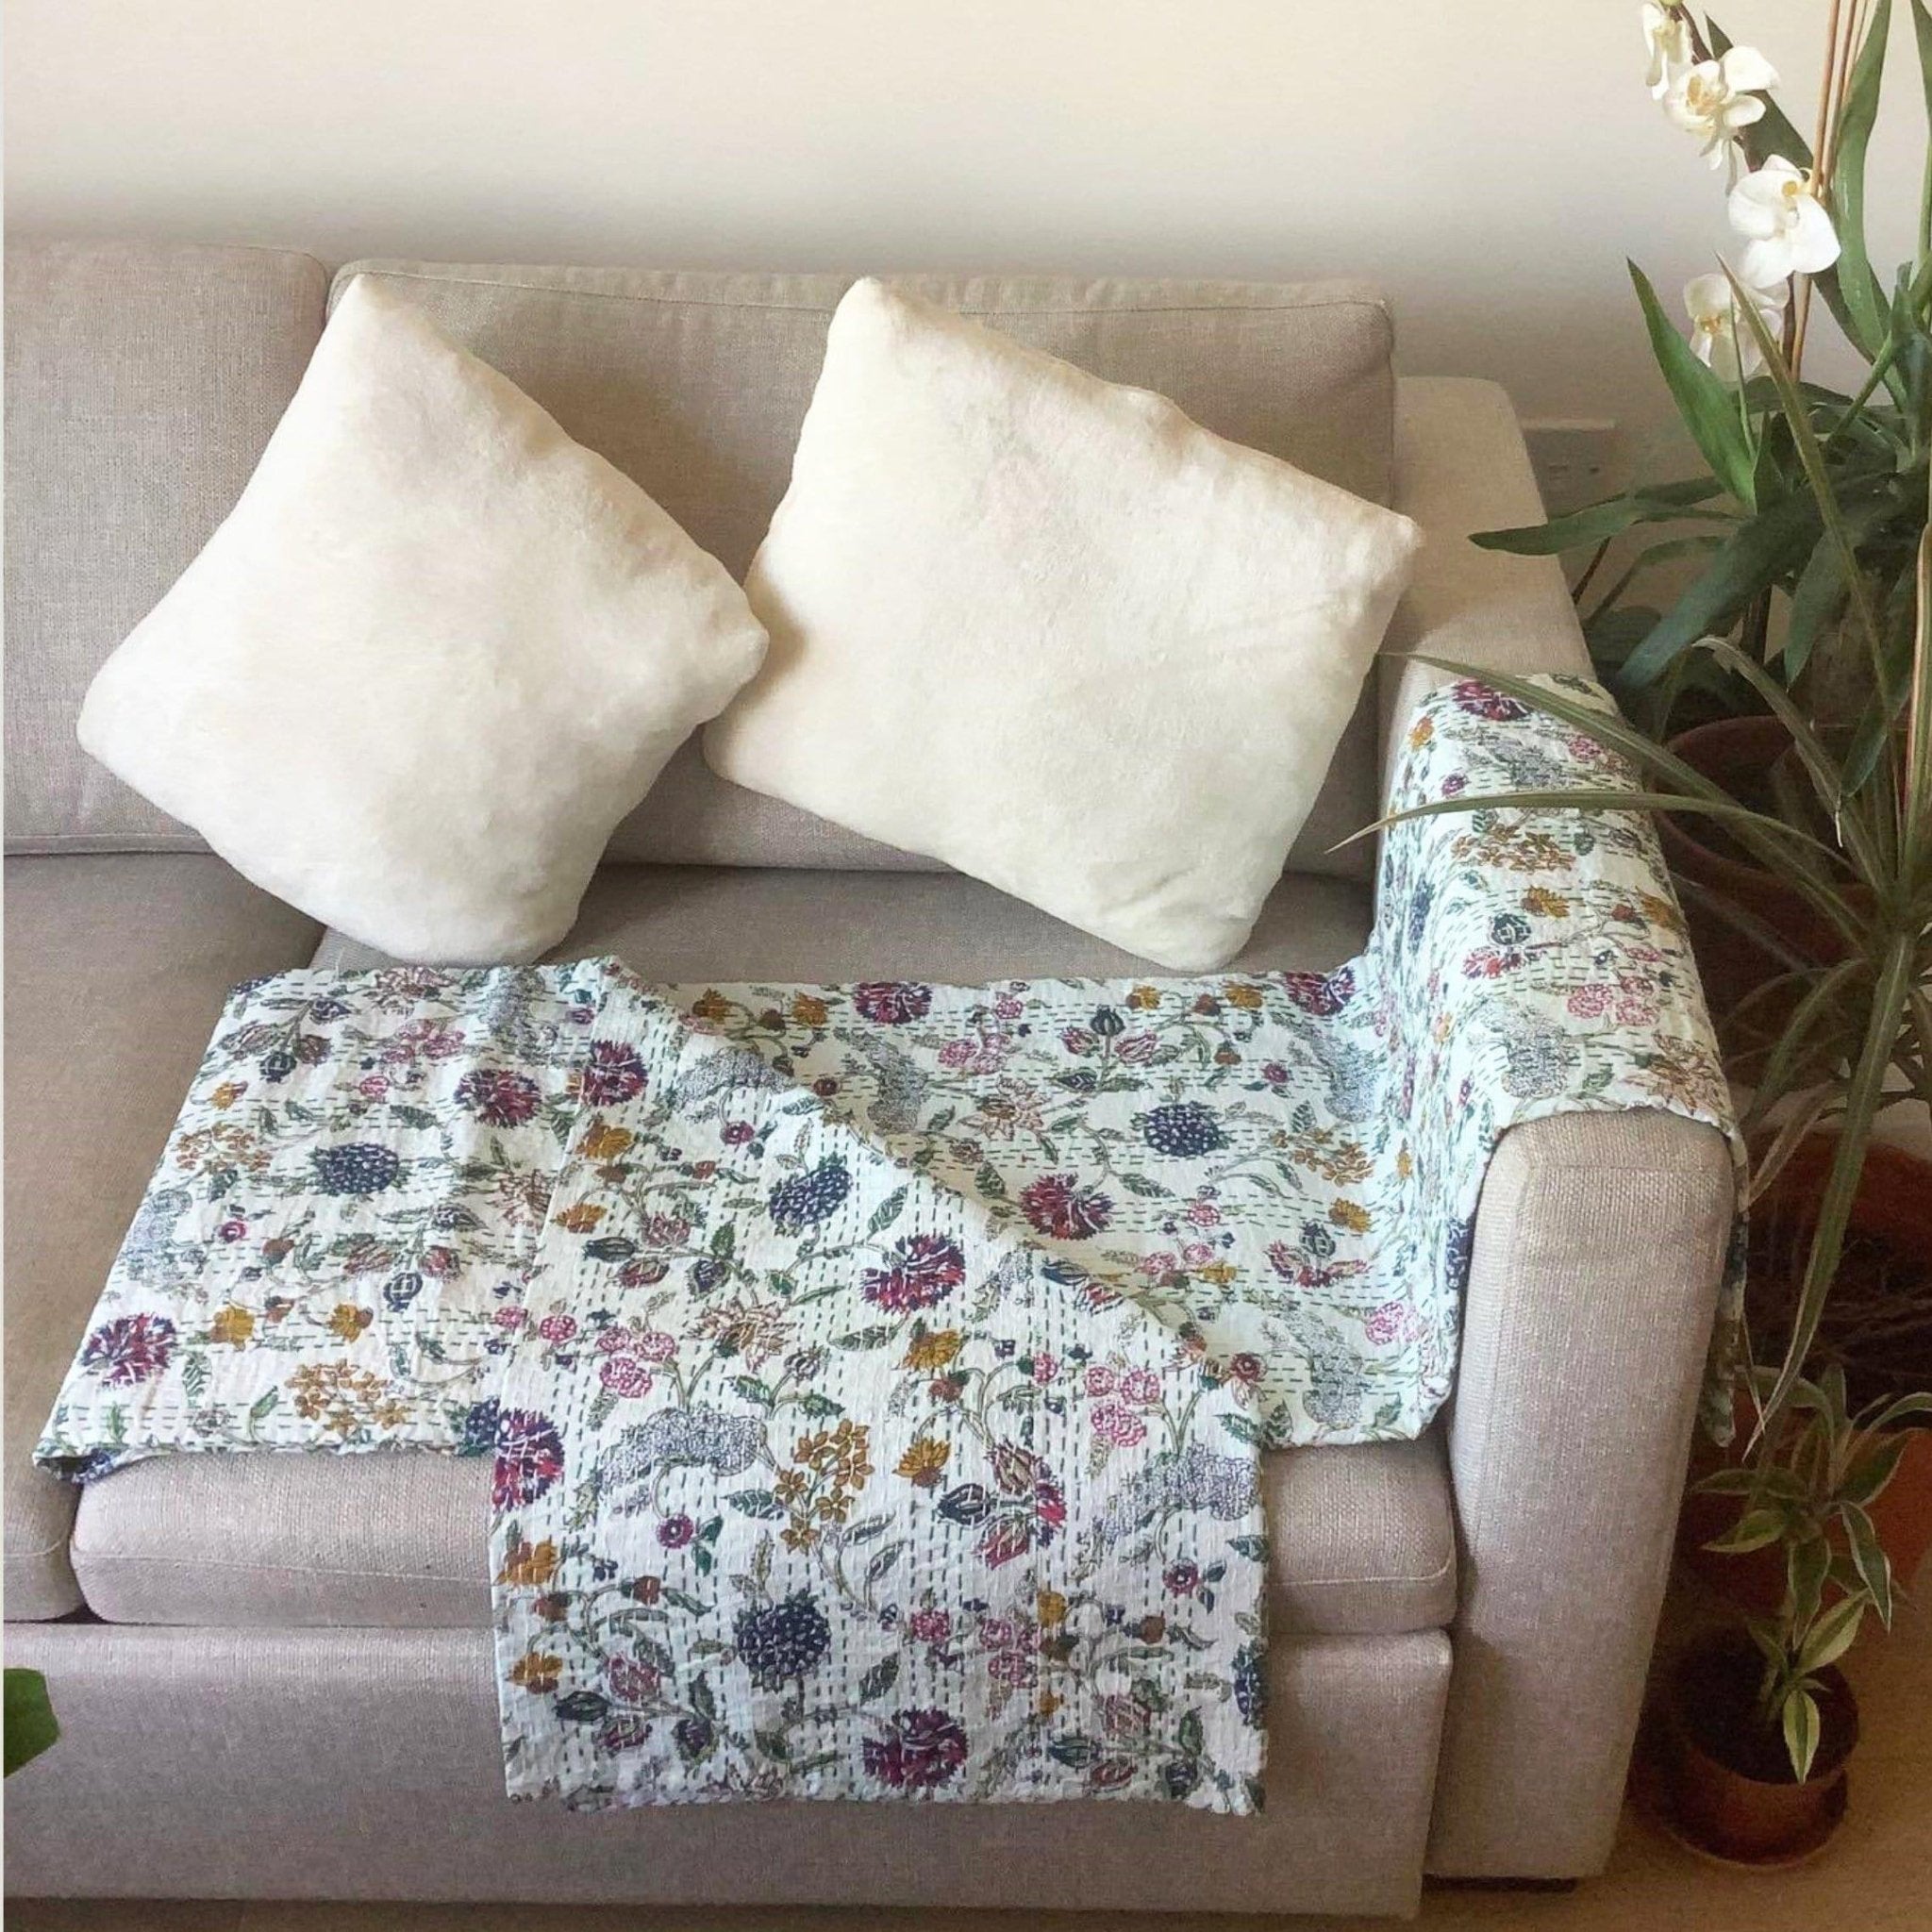 Hand Embroidered Kantha Quilt - Ammpoure Wellbeing